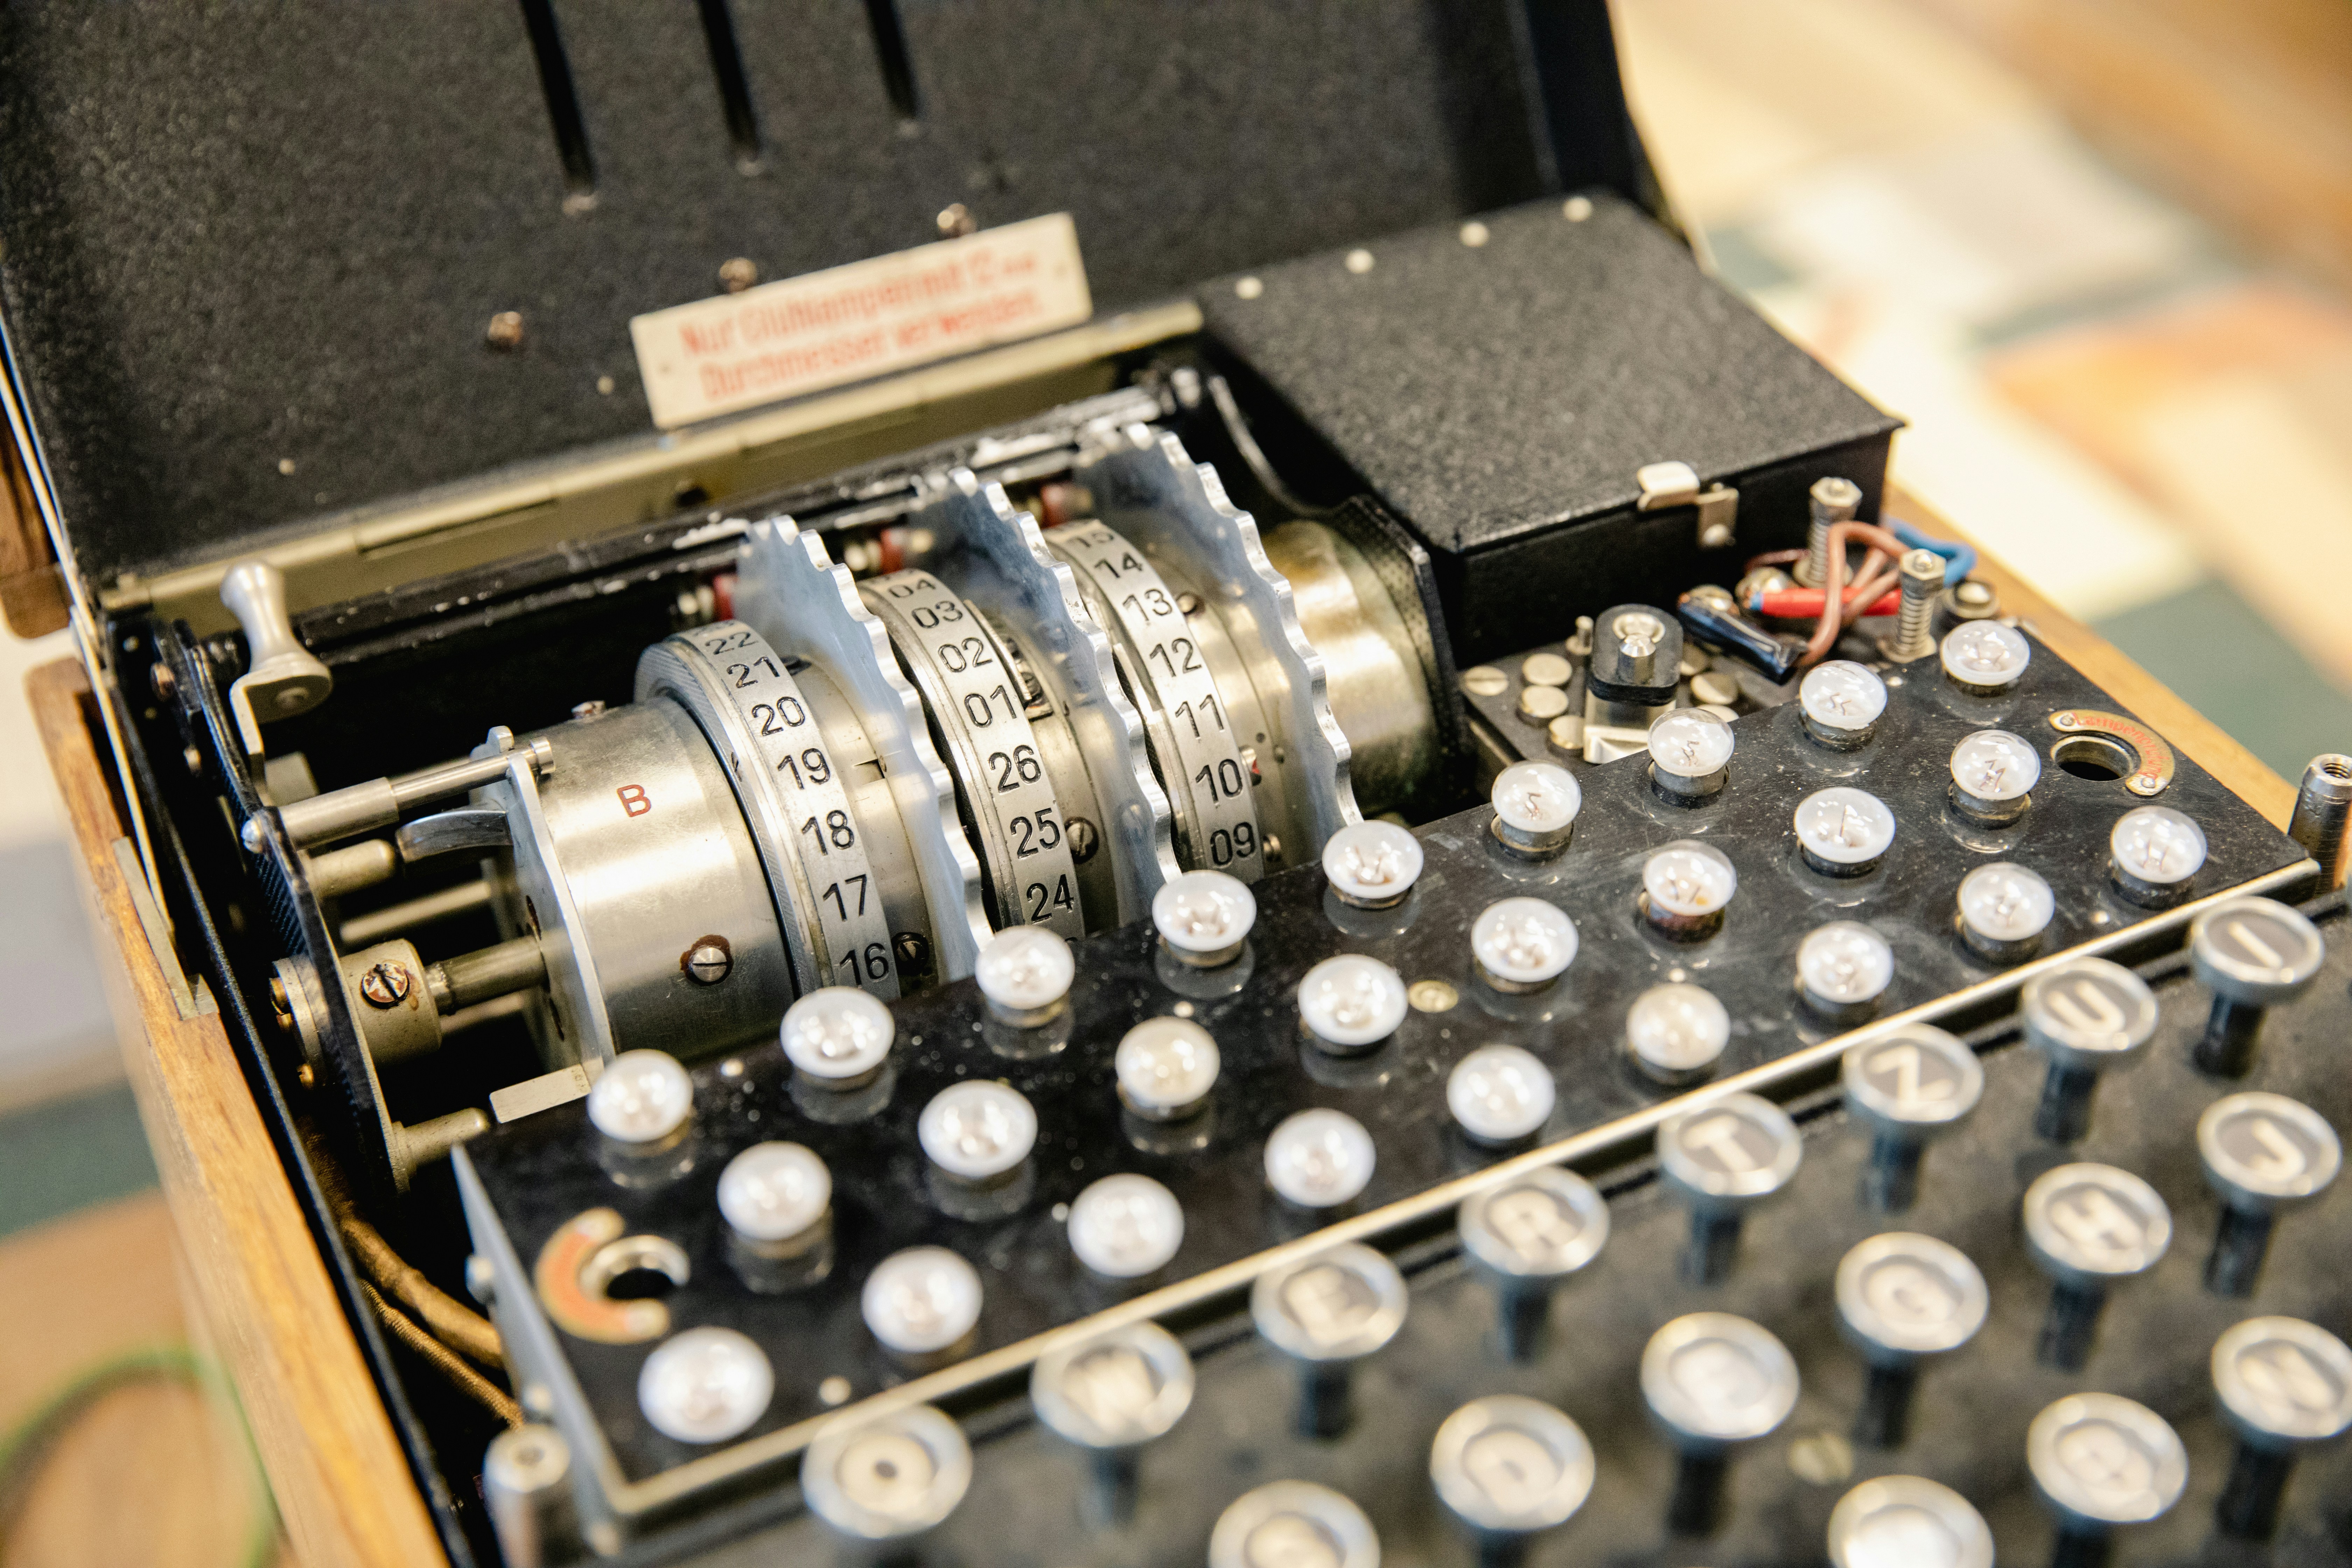 An Enigma machine, used for enciphering messages during World War II.